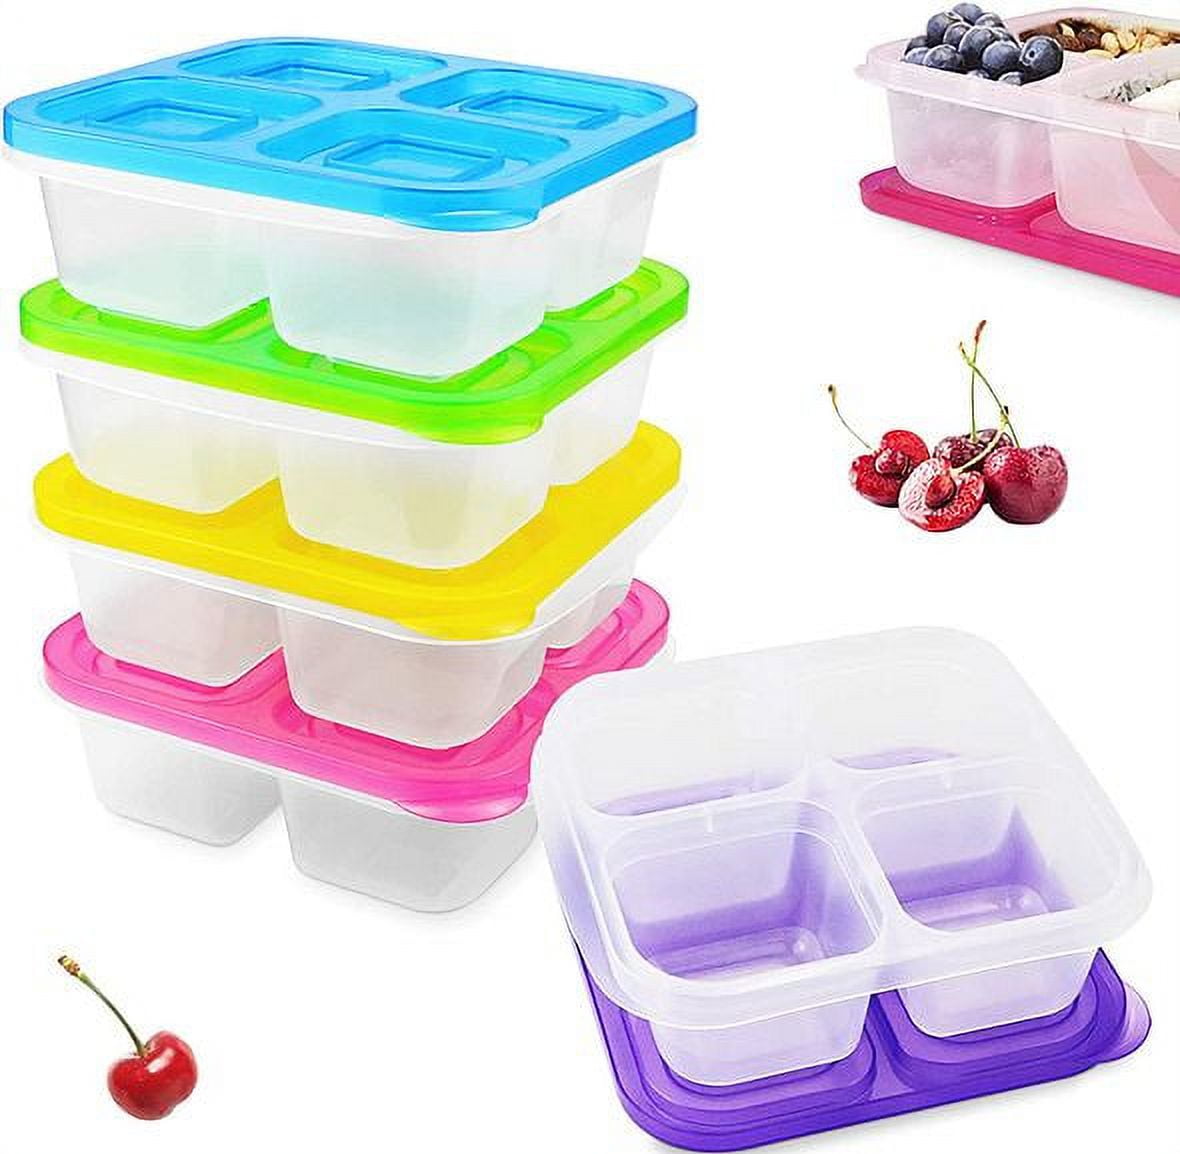  OmieBox Bento Box for Kids - Insulated with Leak Proof Thermos  Food Jar - 3 Compartments, Two Temperature Zones (Single) (Packaging May  Vary): Home & Kitchen